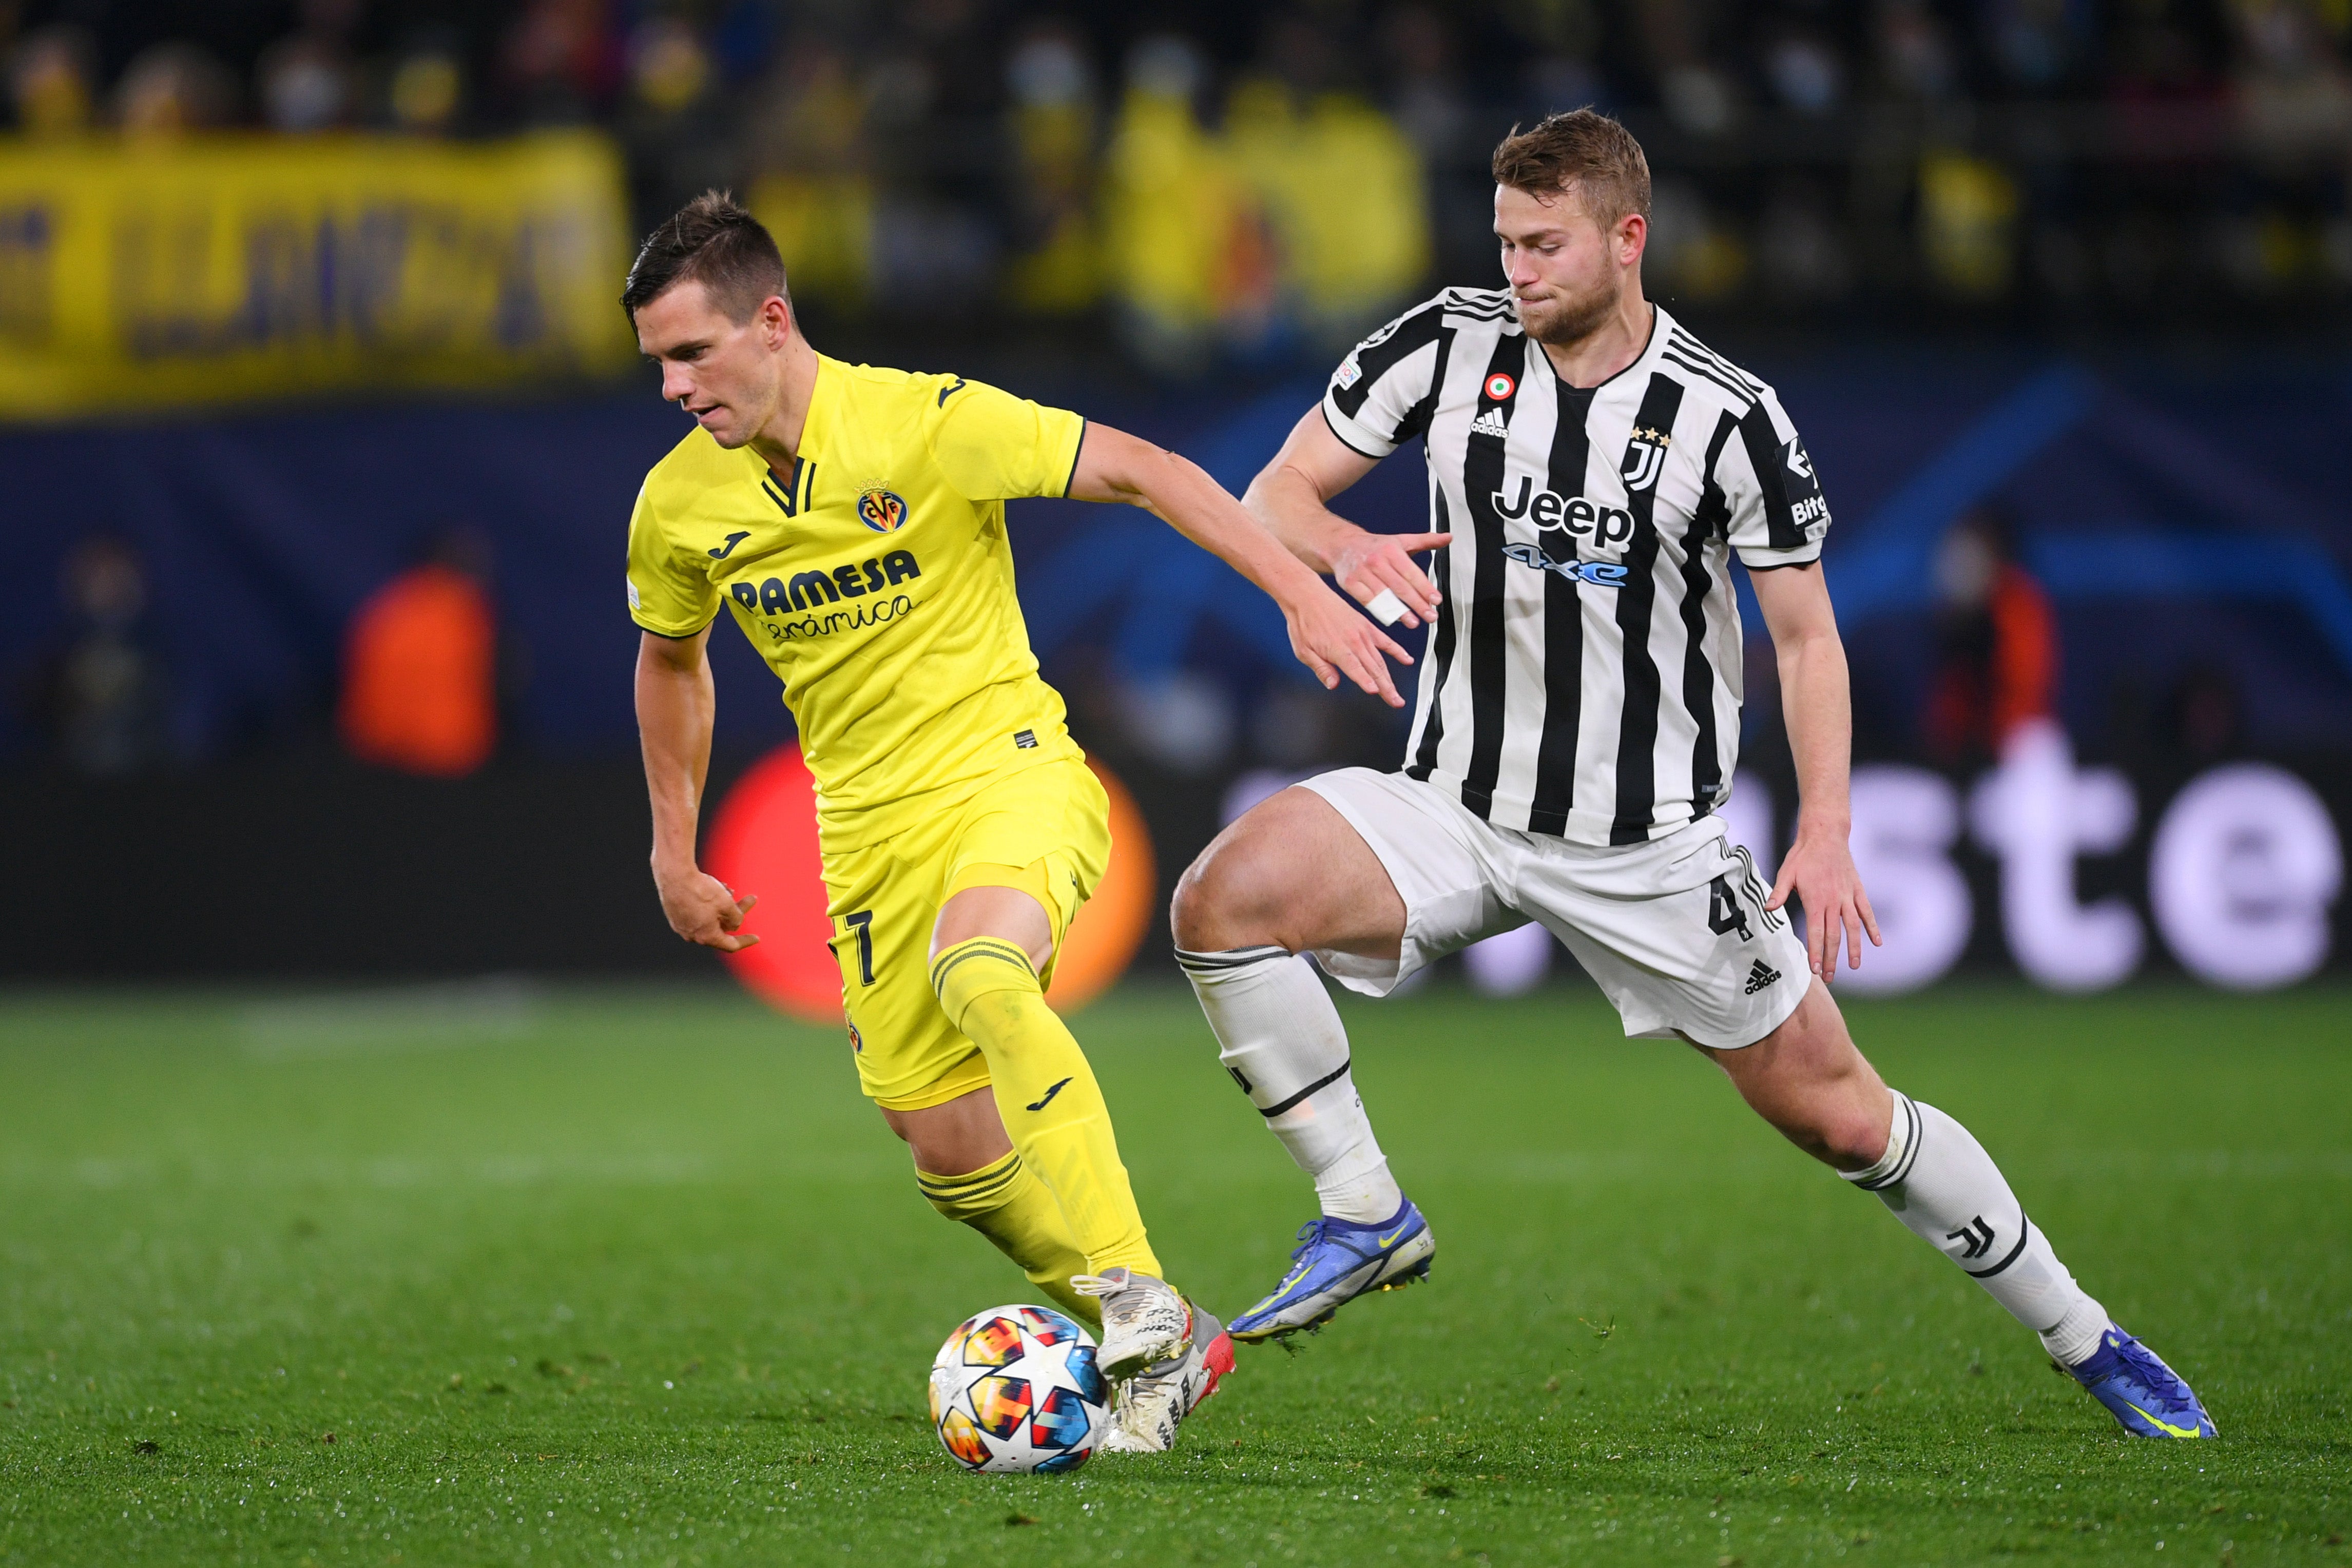 Juventus host Villarreal in the second leg of their Round of 16 Champions League tie